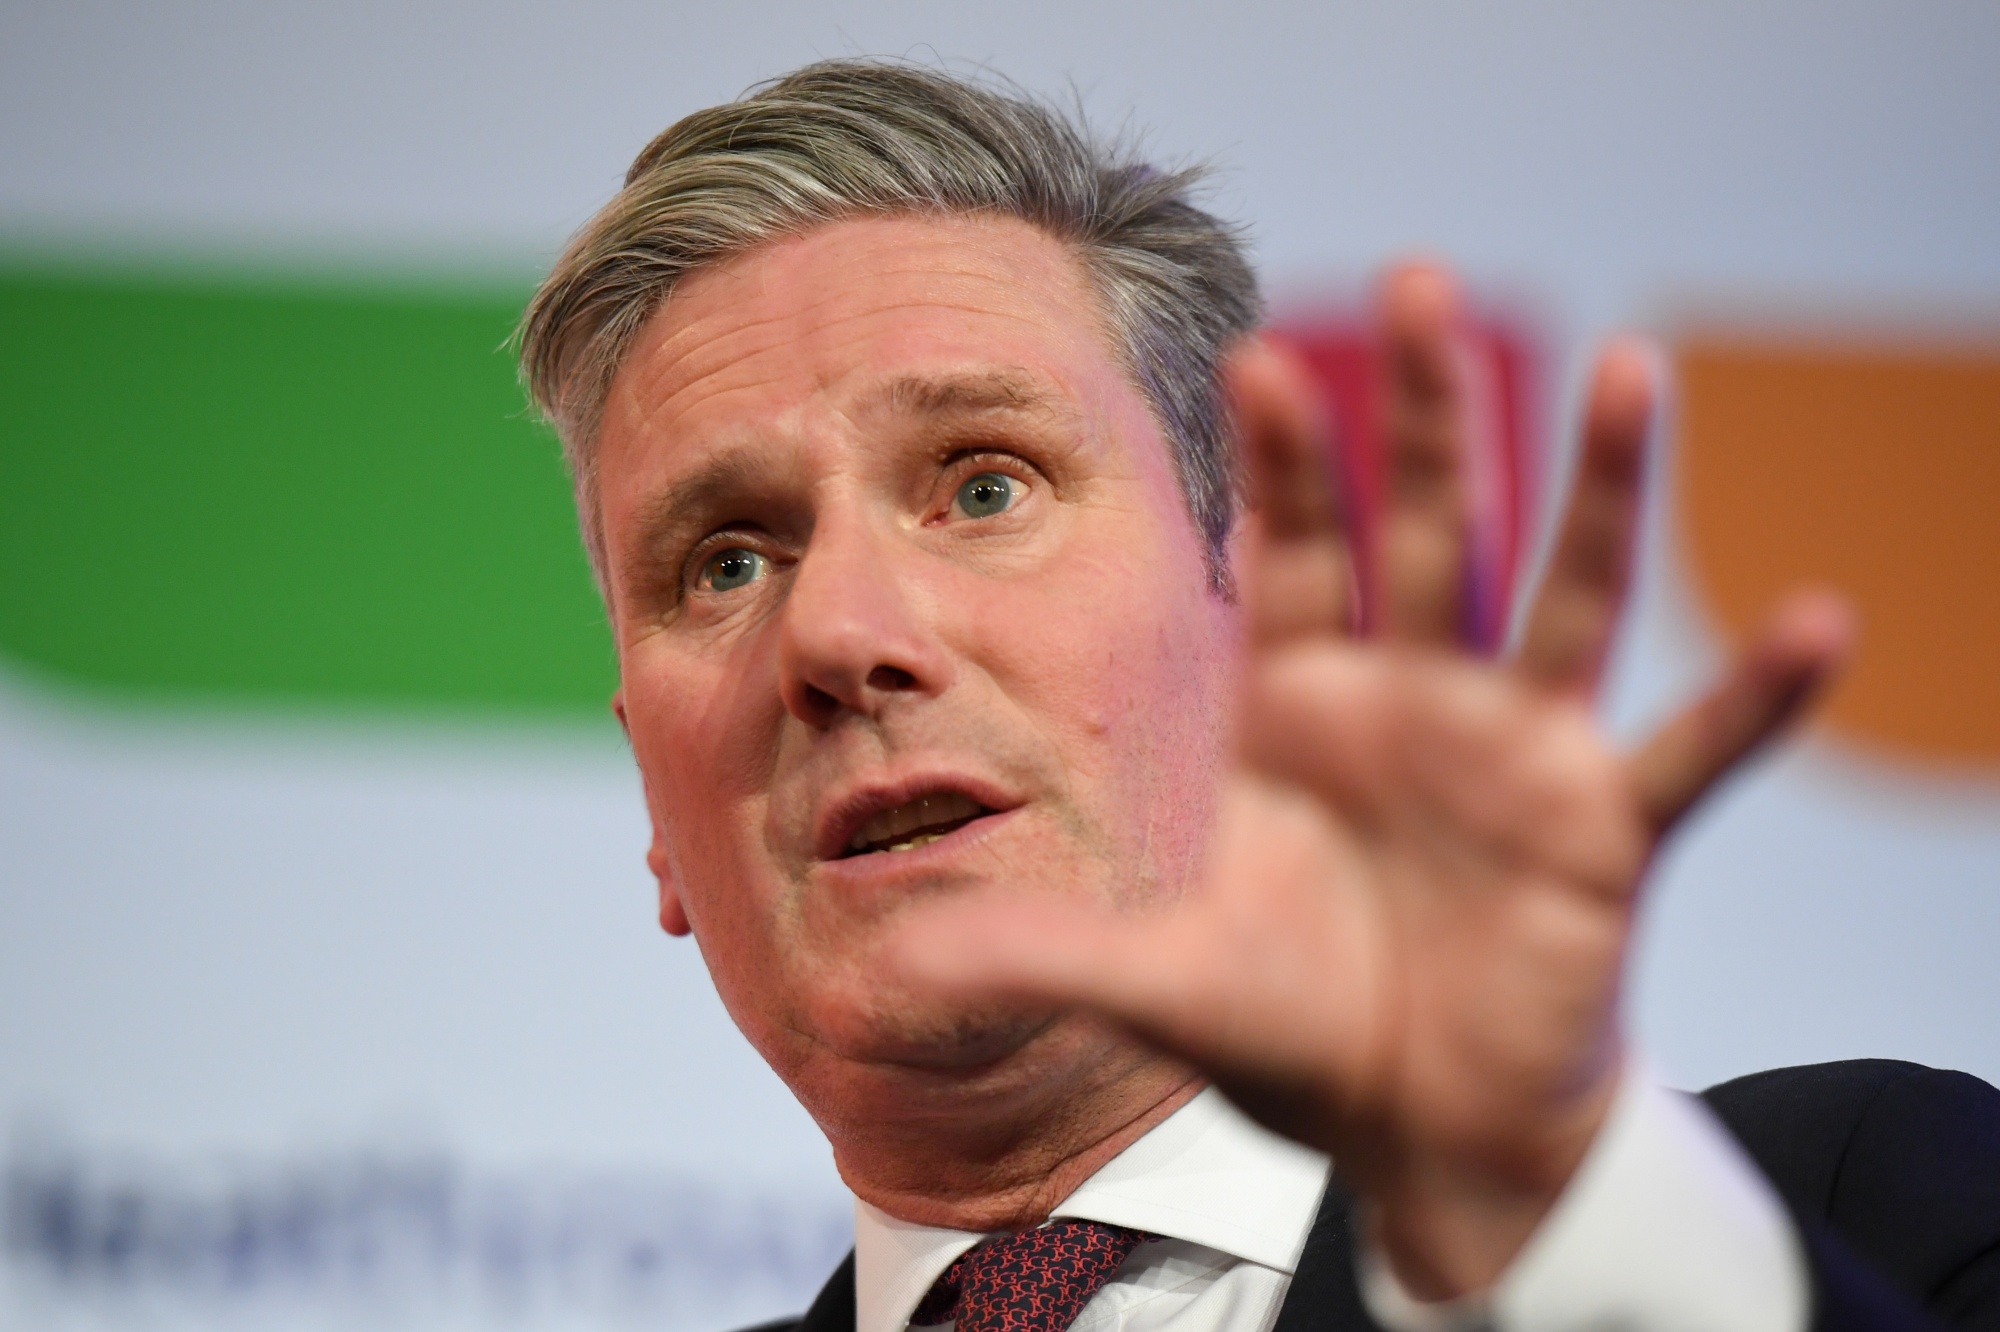 Starmer Plans to Block New North Sea Projects: The Times - Bloomberg